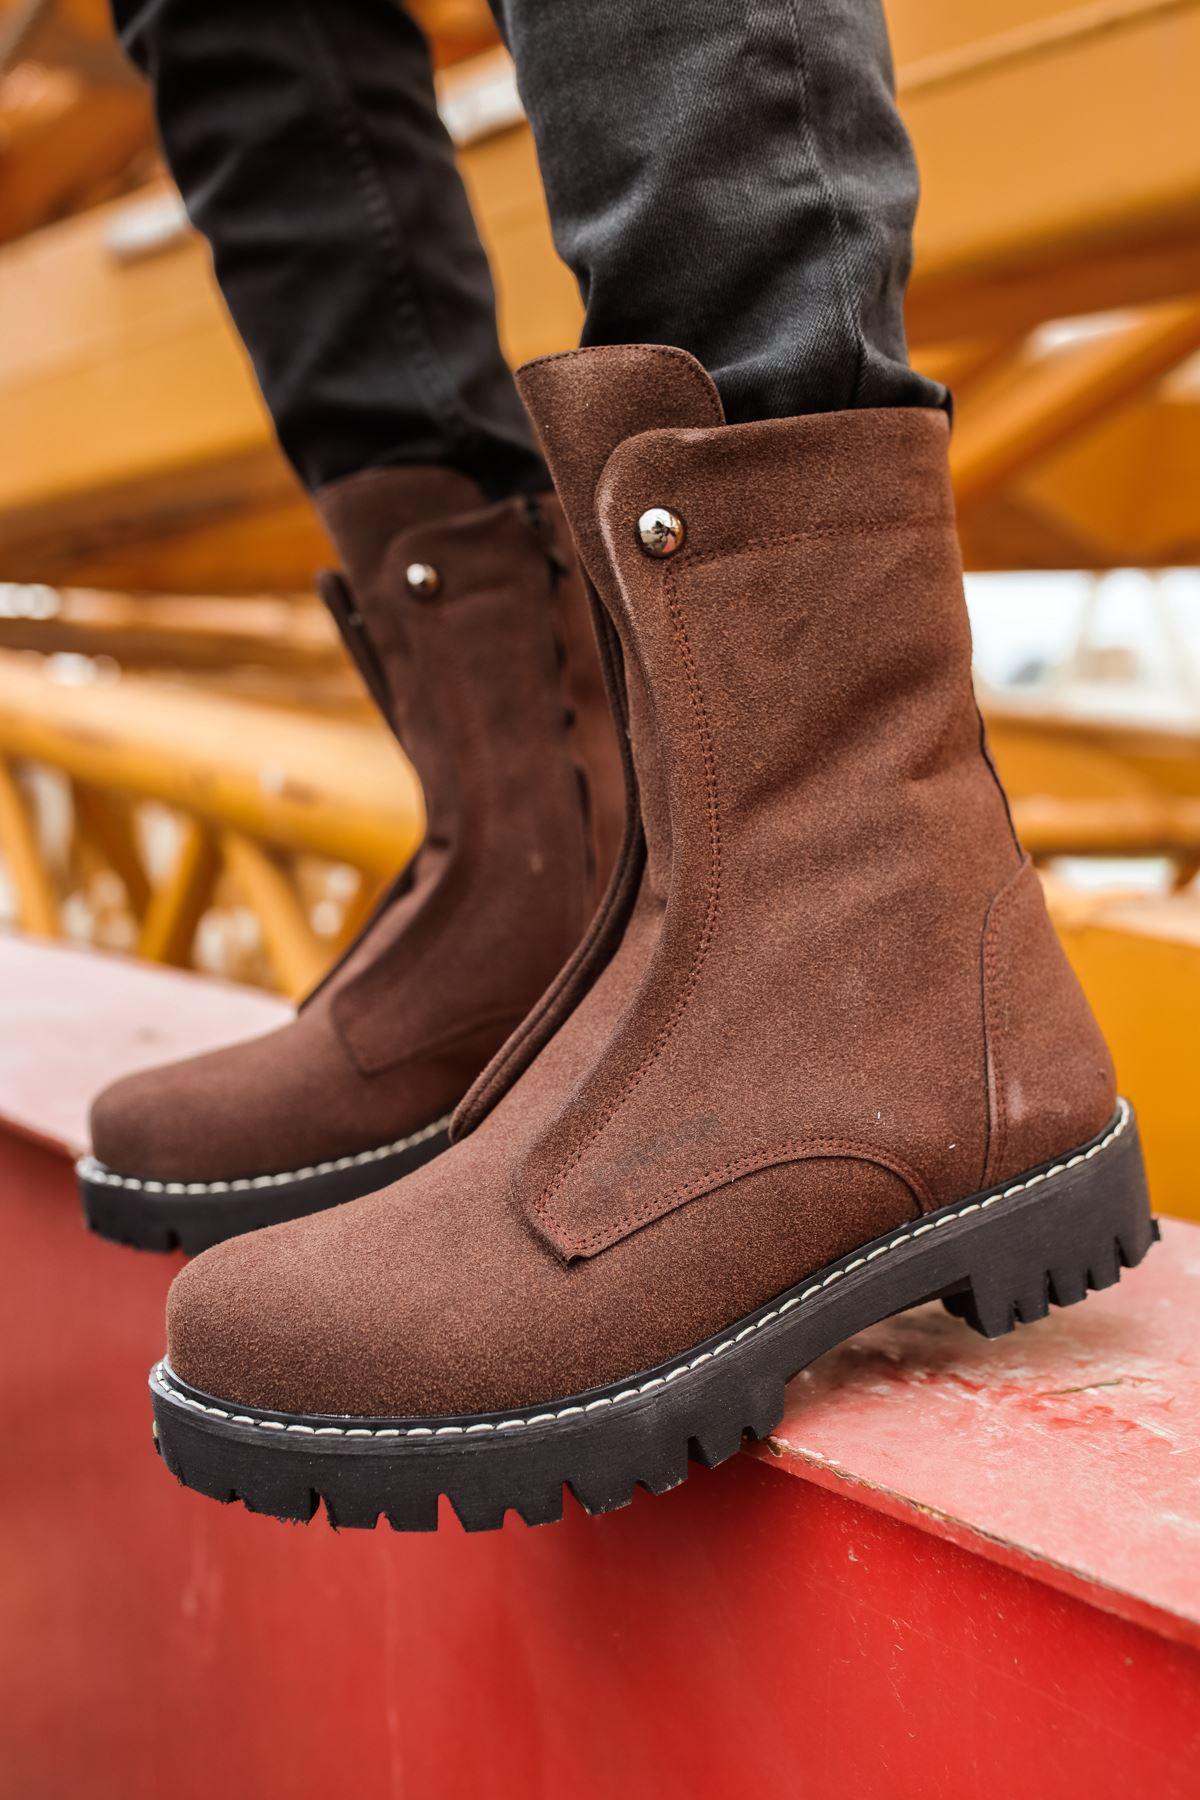 CH027 Men's Suede Brown-Black Sole Casual Winter Boots - STREET MODE ™